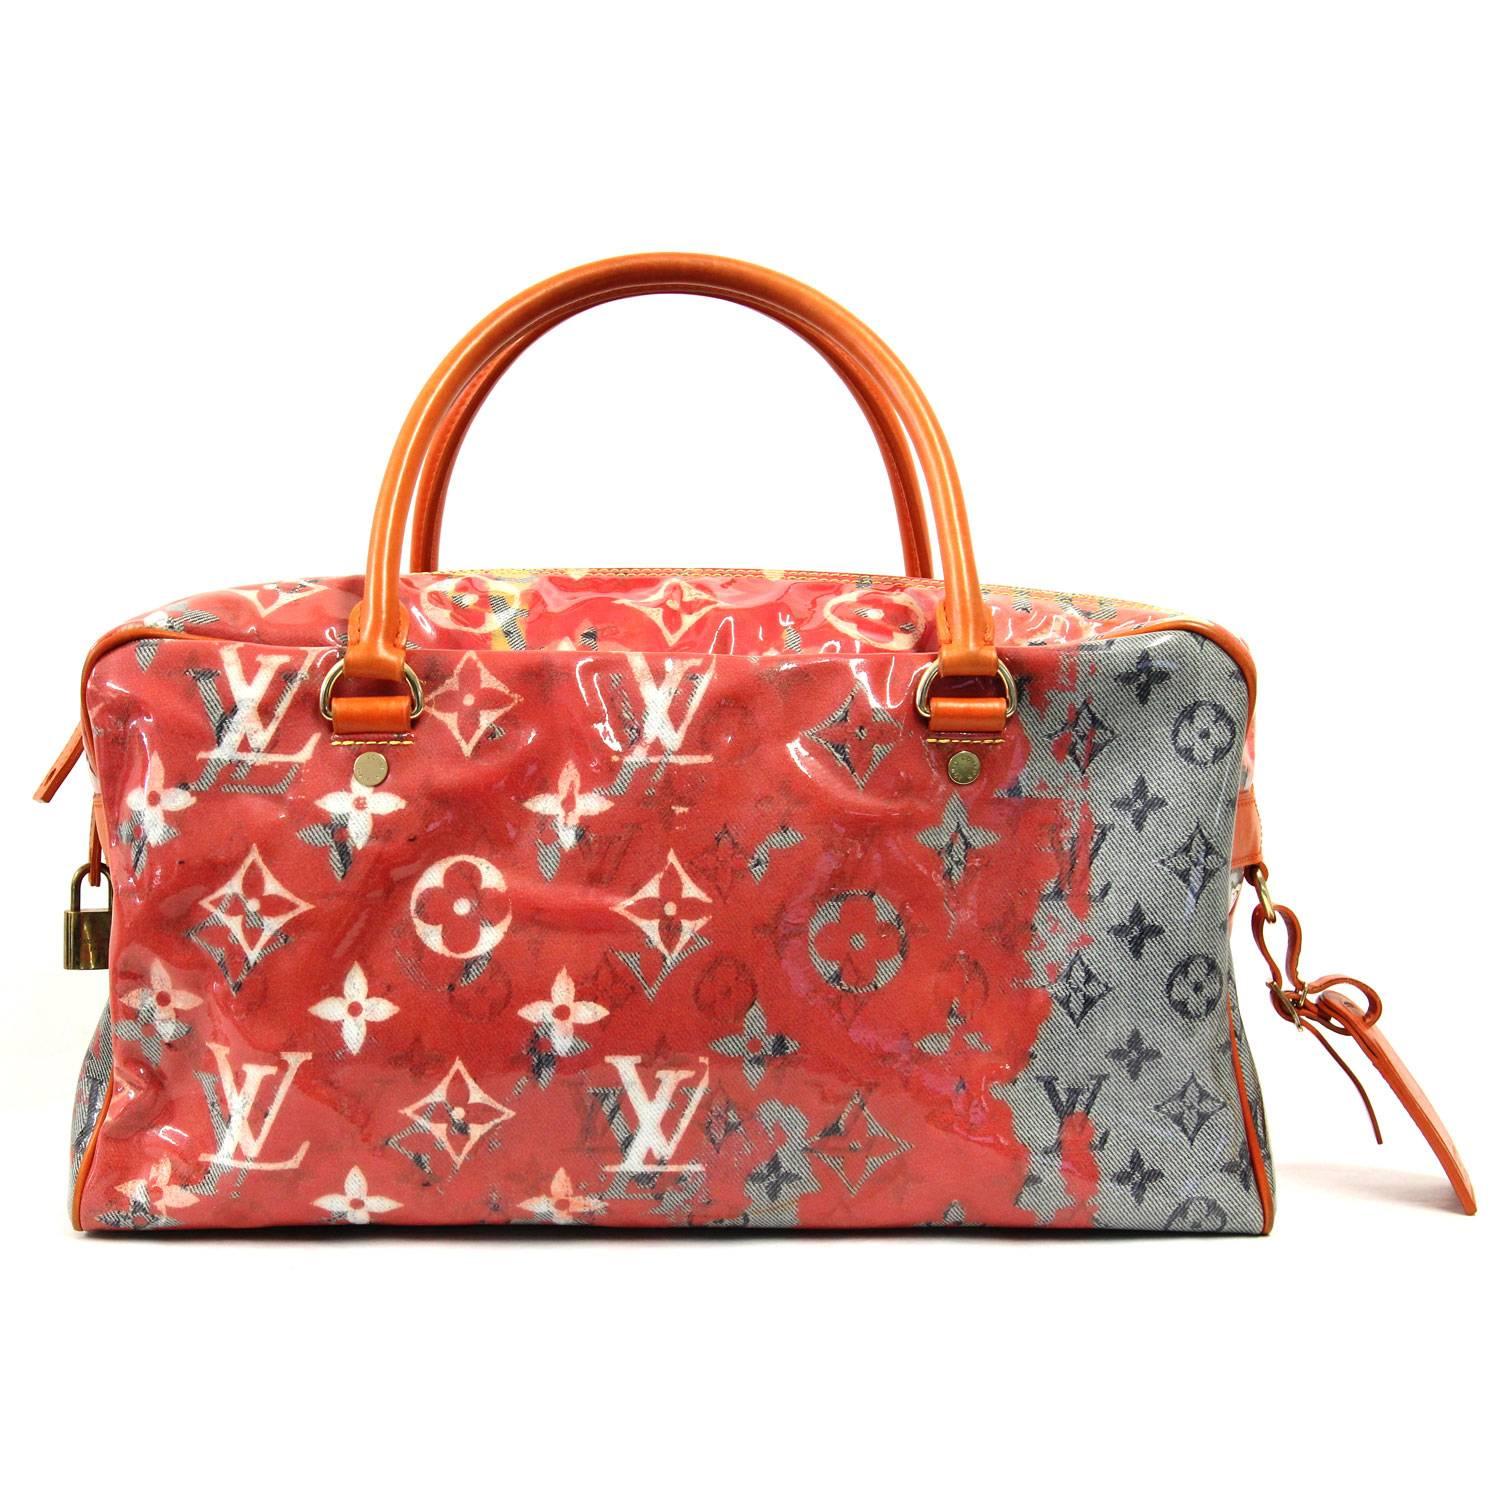 Amazing and colorful Louis Vuitton 2008 Special Edition Pulp Weekender GM Duffle Bag.
Monogram has been here re-interpreted by Marc Jacobs together with Richard Prince, one of the most innovative artists from the USA.
Two leather top handles,